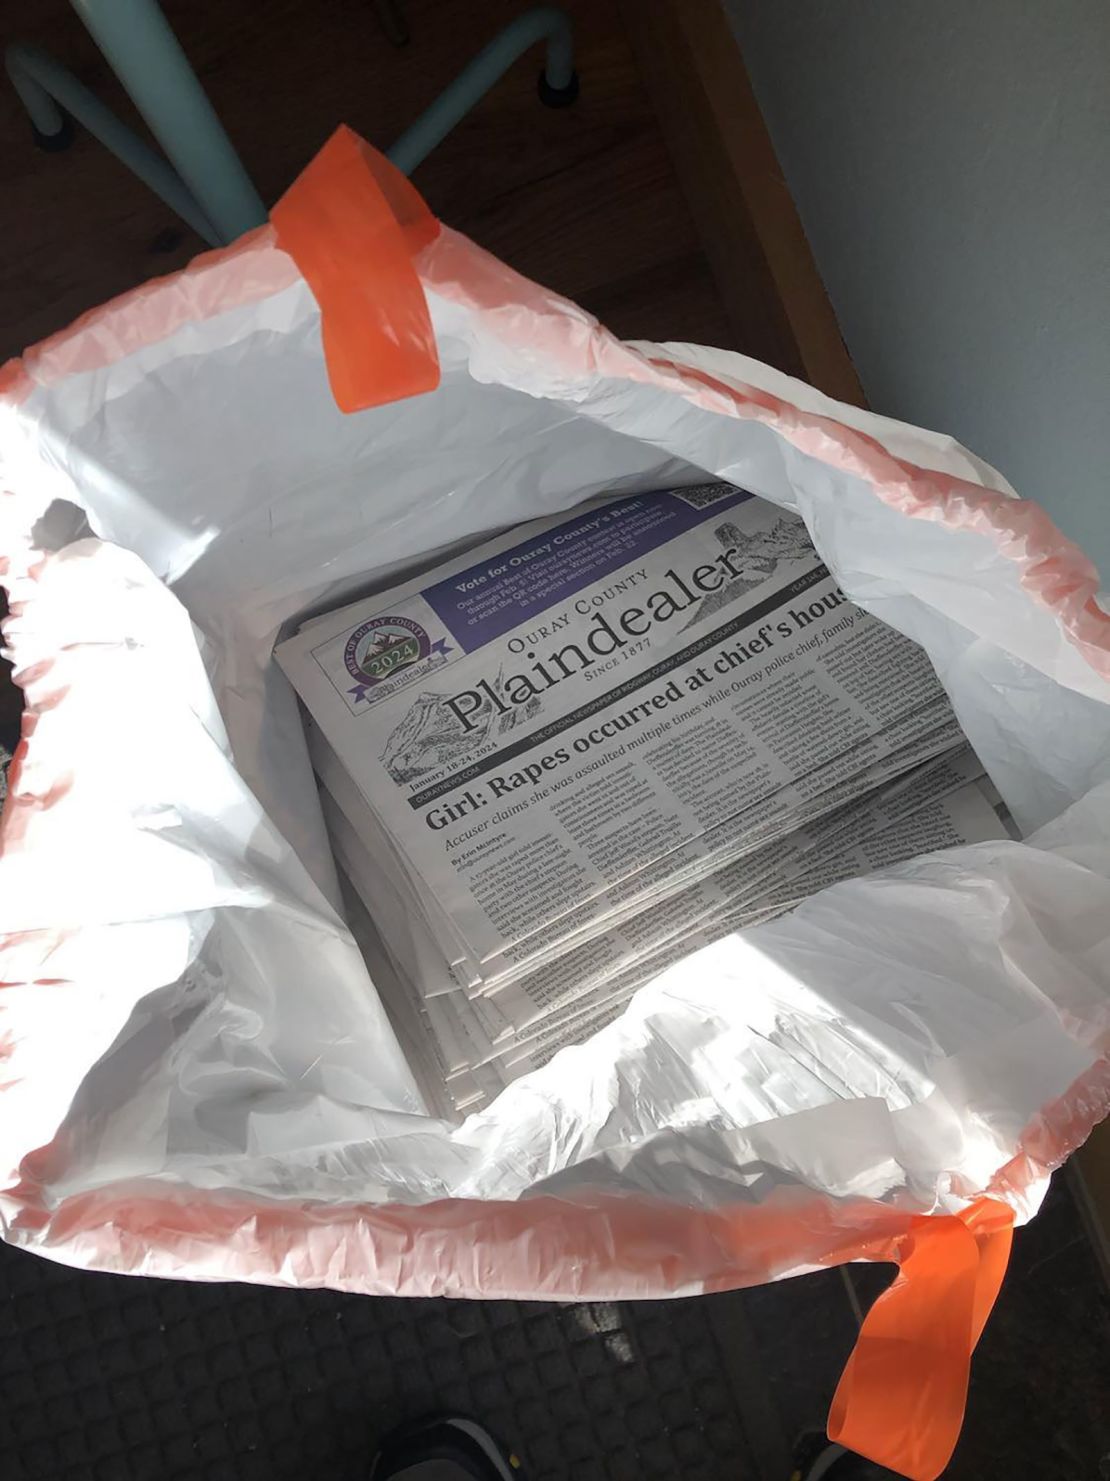 The newspapers were returned in a garbage bag on Thursday evening.